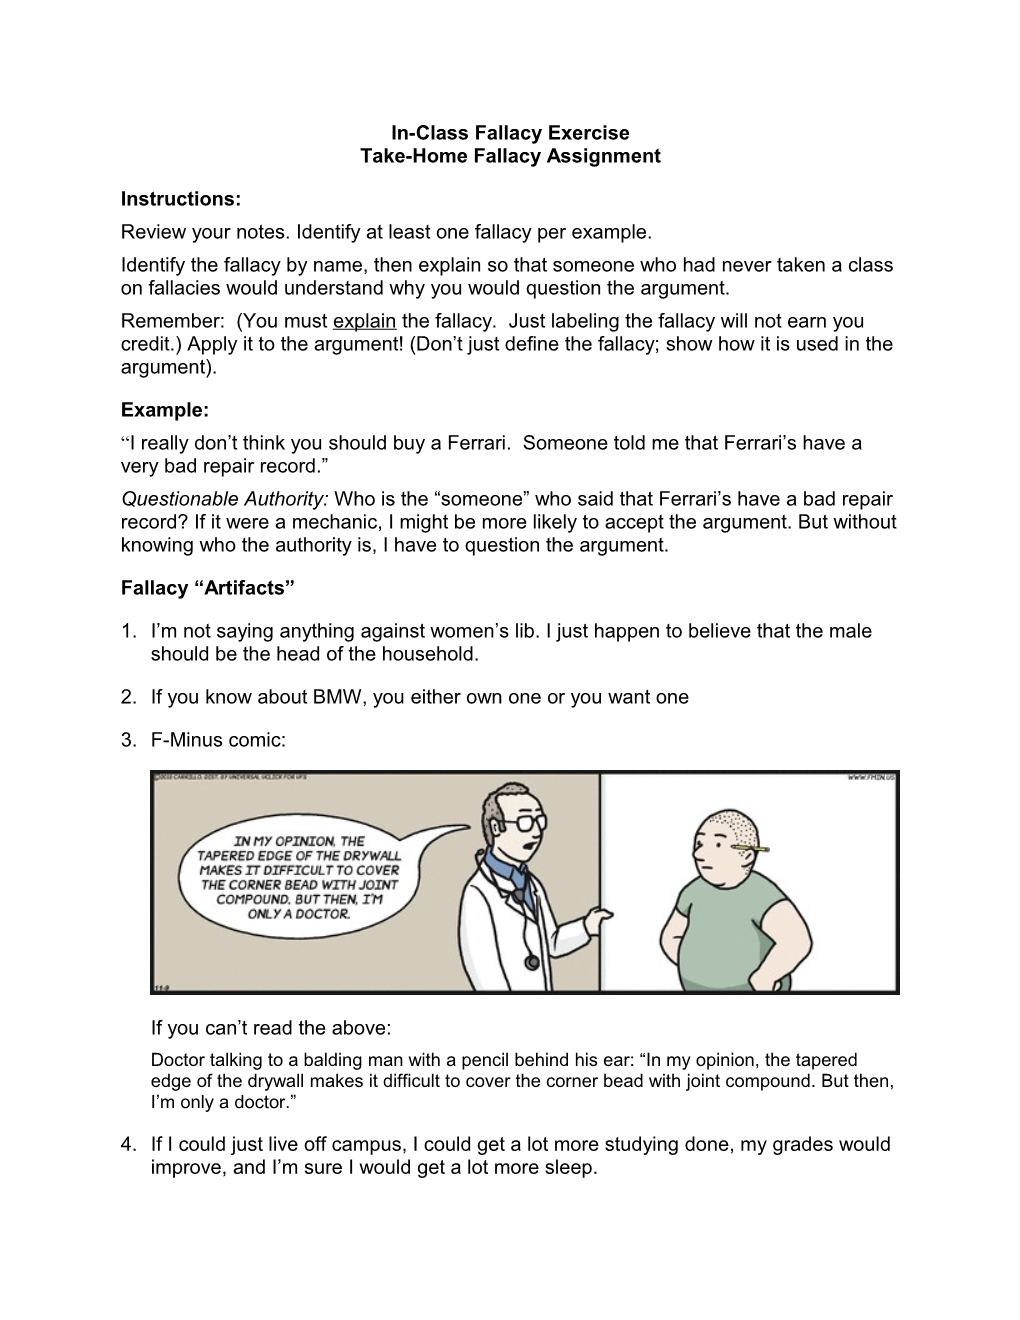 Take-Home Fallacy Assignment